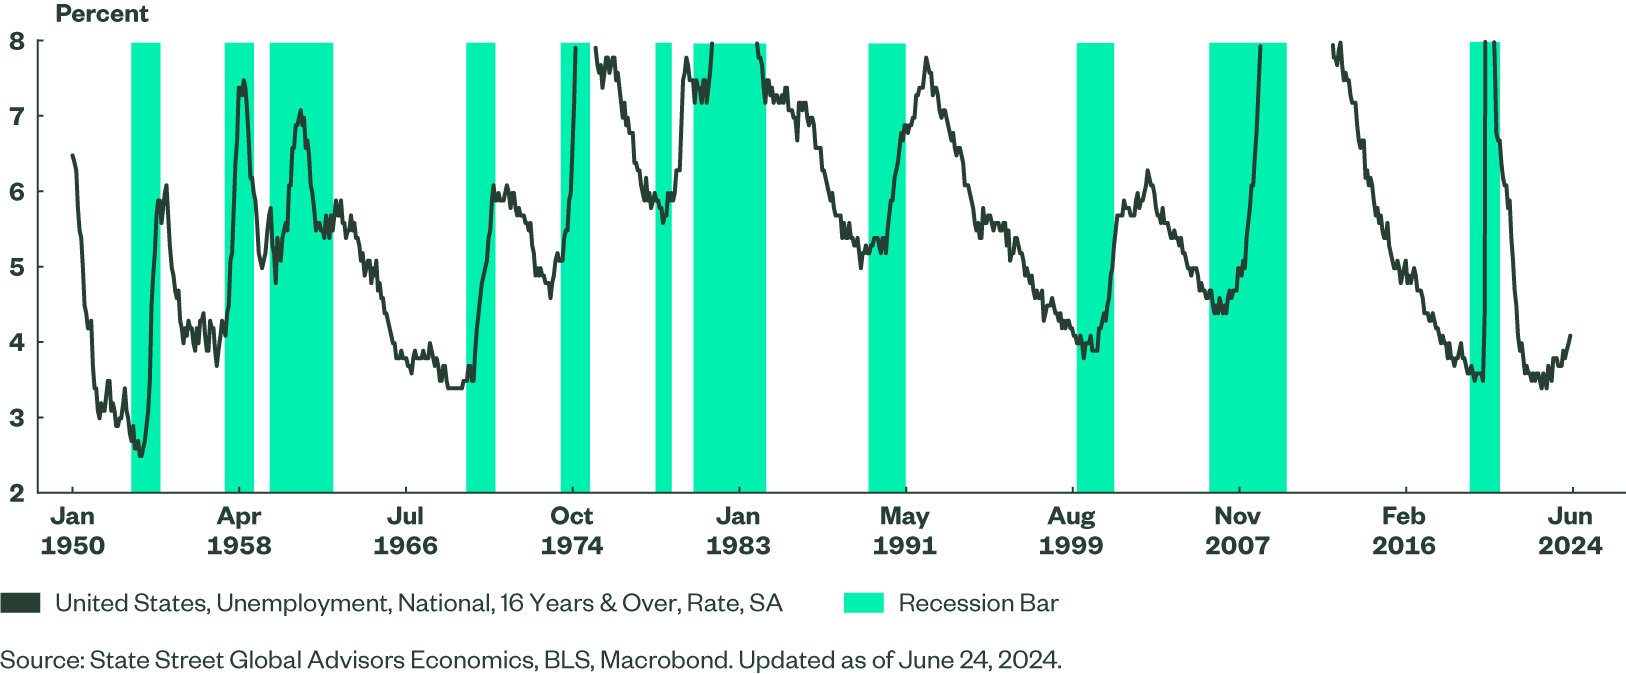 Upturns in the Unemployment Rate Have Prefaced Recessions